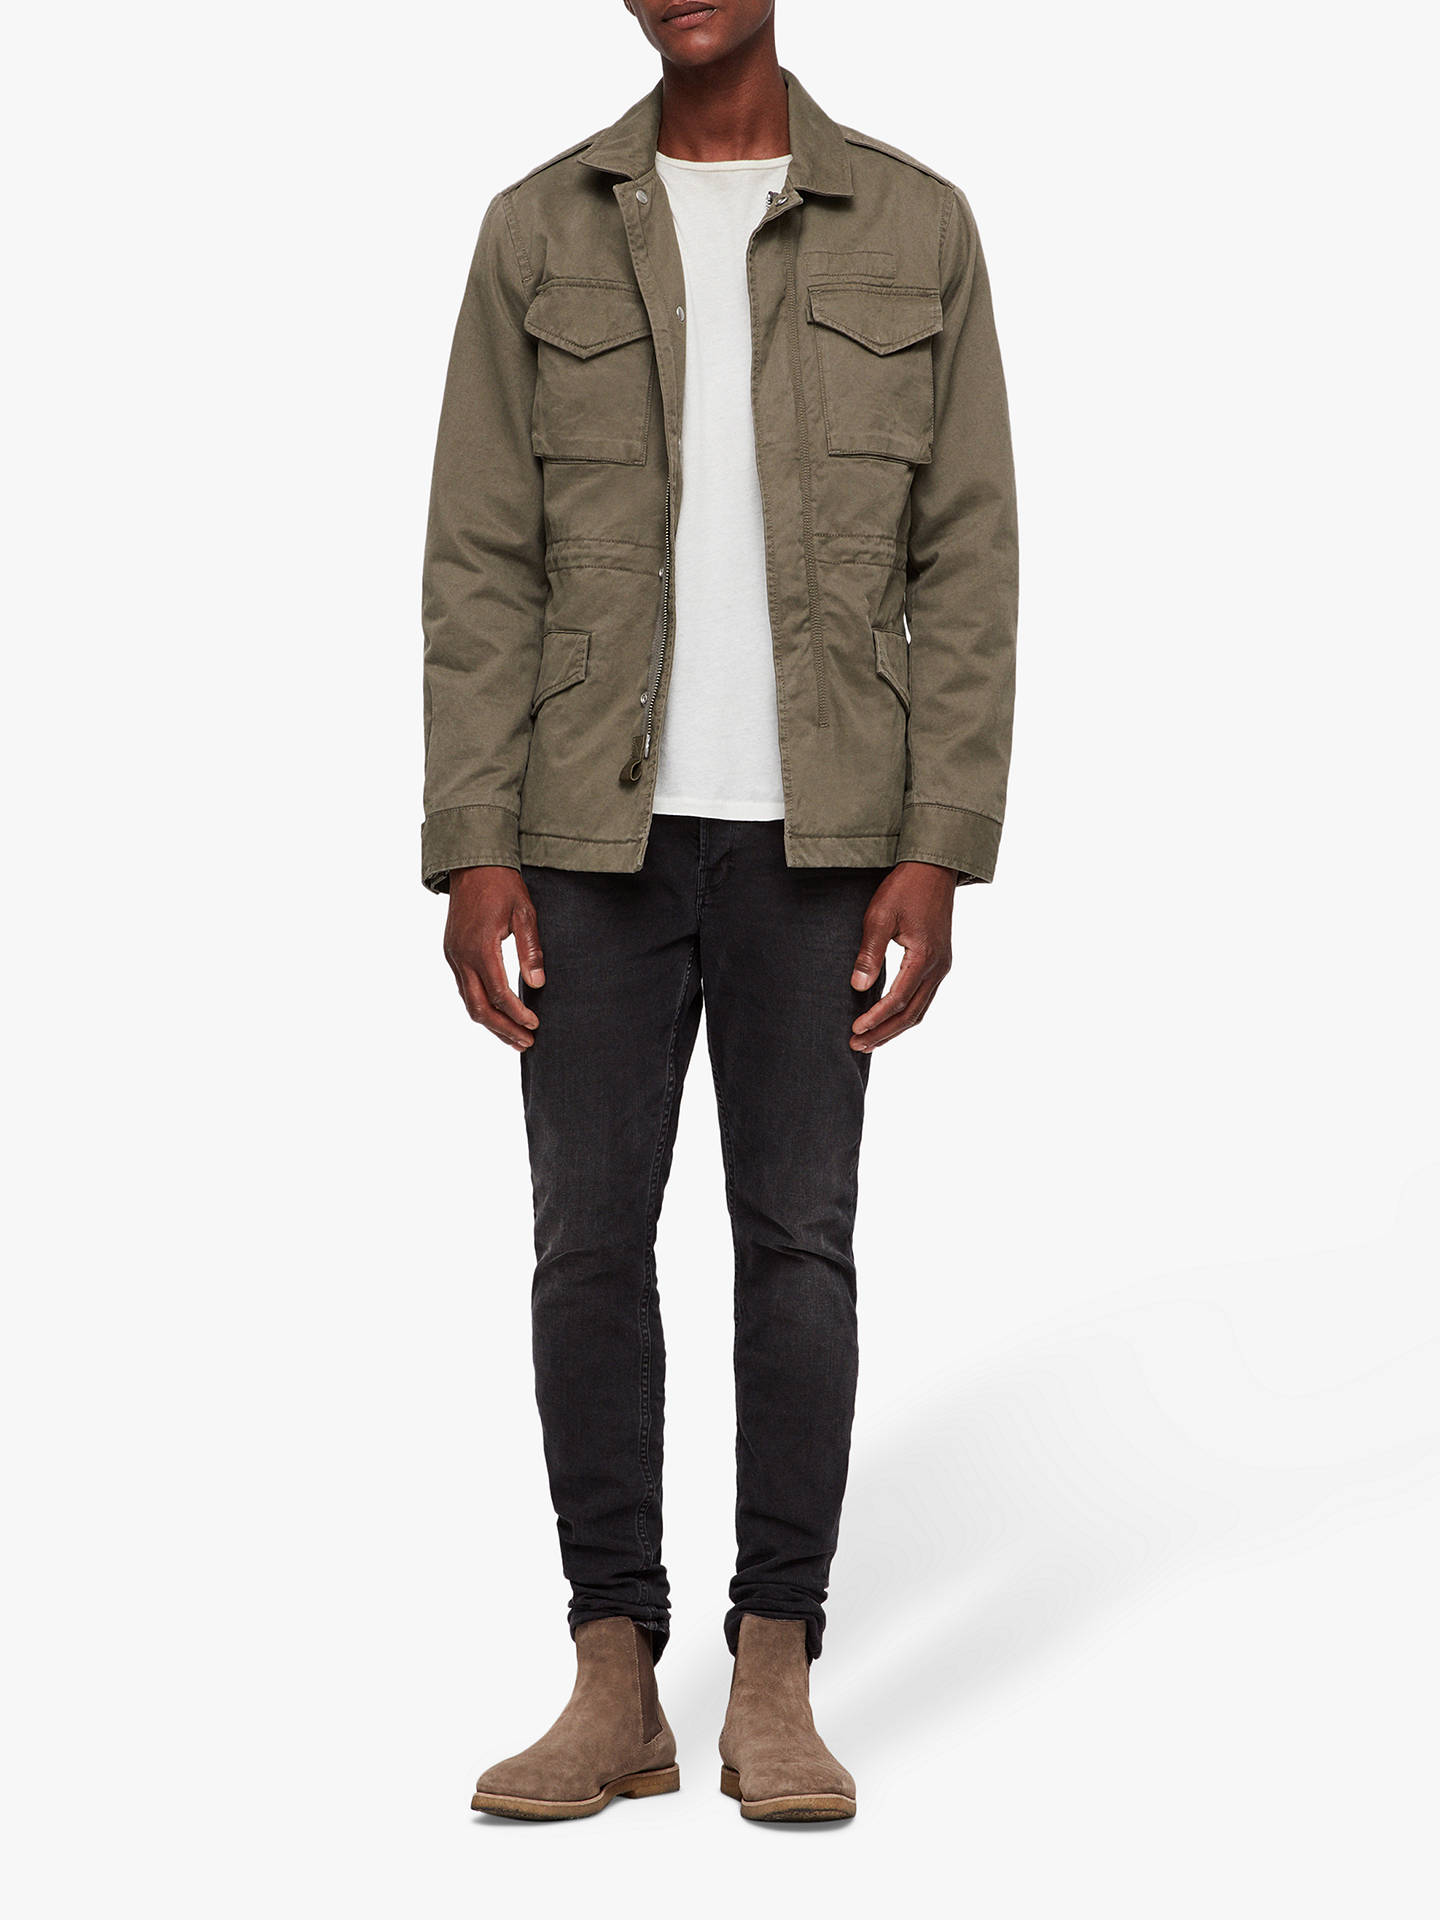 AllSaints Cote Military Jacket, Dusty Olive at John Lewis & Partners